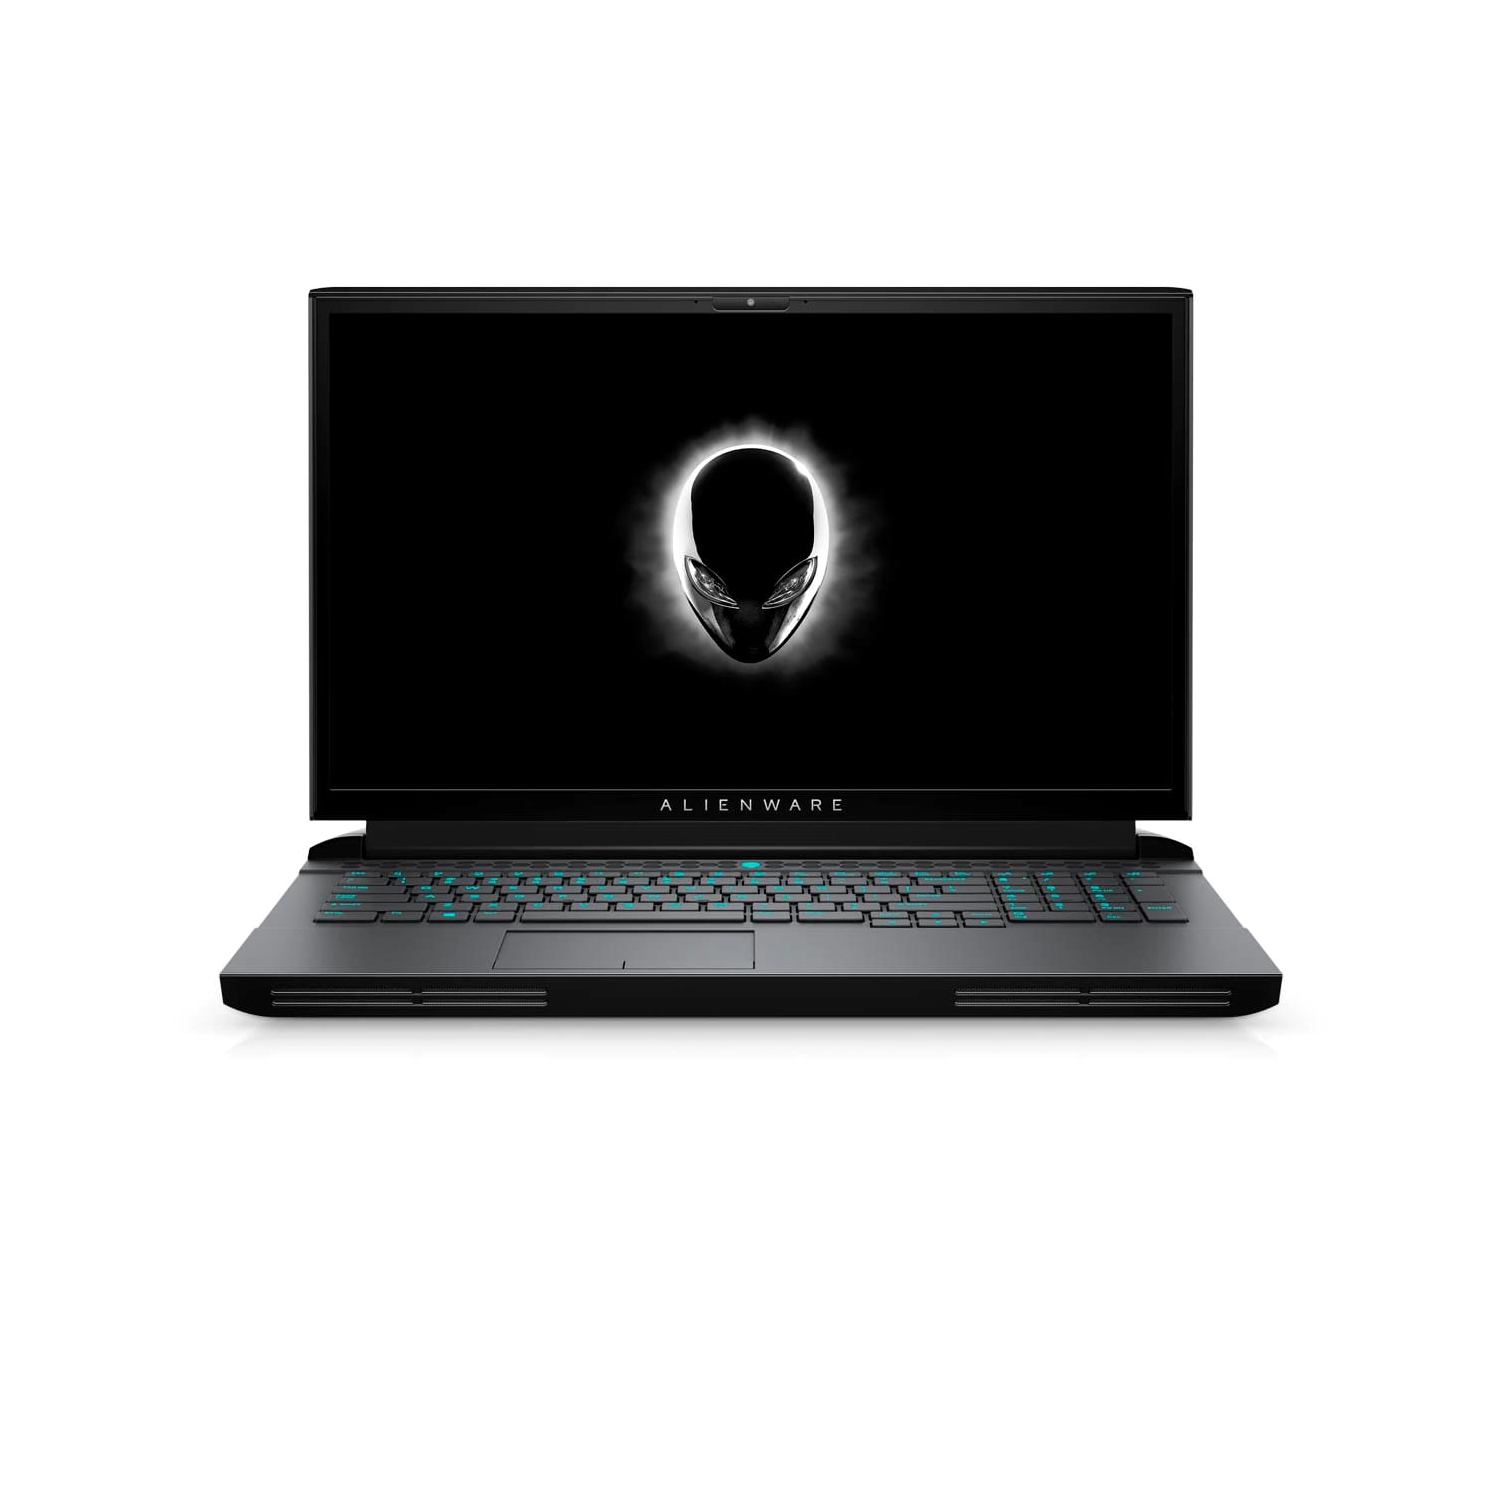 Refurbished (Excellent) - Dell Alienware 17 51m R2 Gaming Laptop (2020), 17.3" FHD, Core i7, 1TB SSD, 32GB RAM, RTX 2060, 8 Cores @ 4.8 GHz, 10th Gen CPU Certified